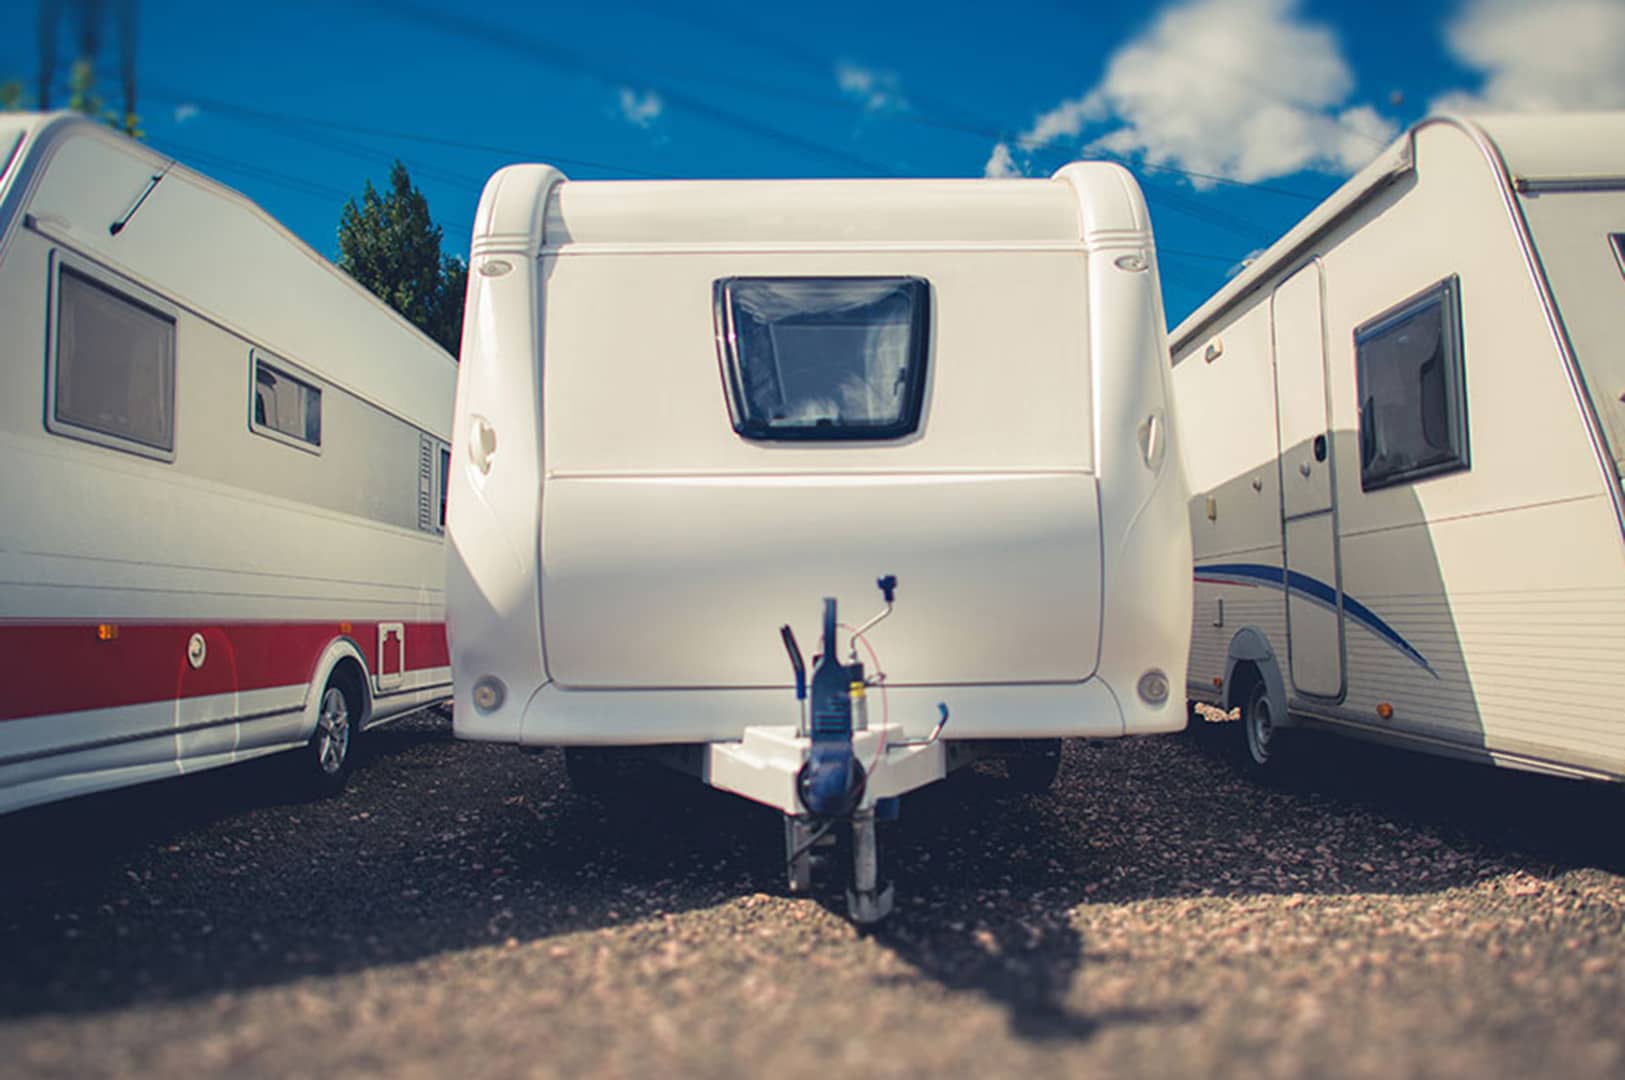 Where Can I Park My RV For Free Overnight? Where Can I Park My Travel Trailer